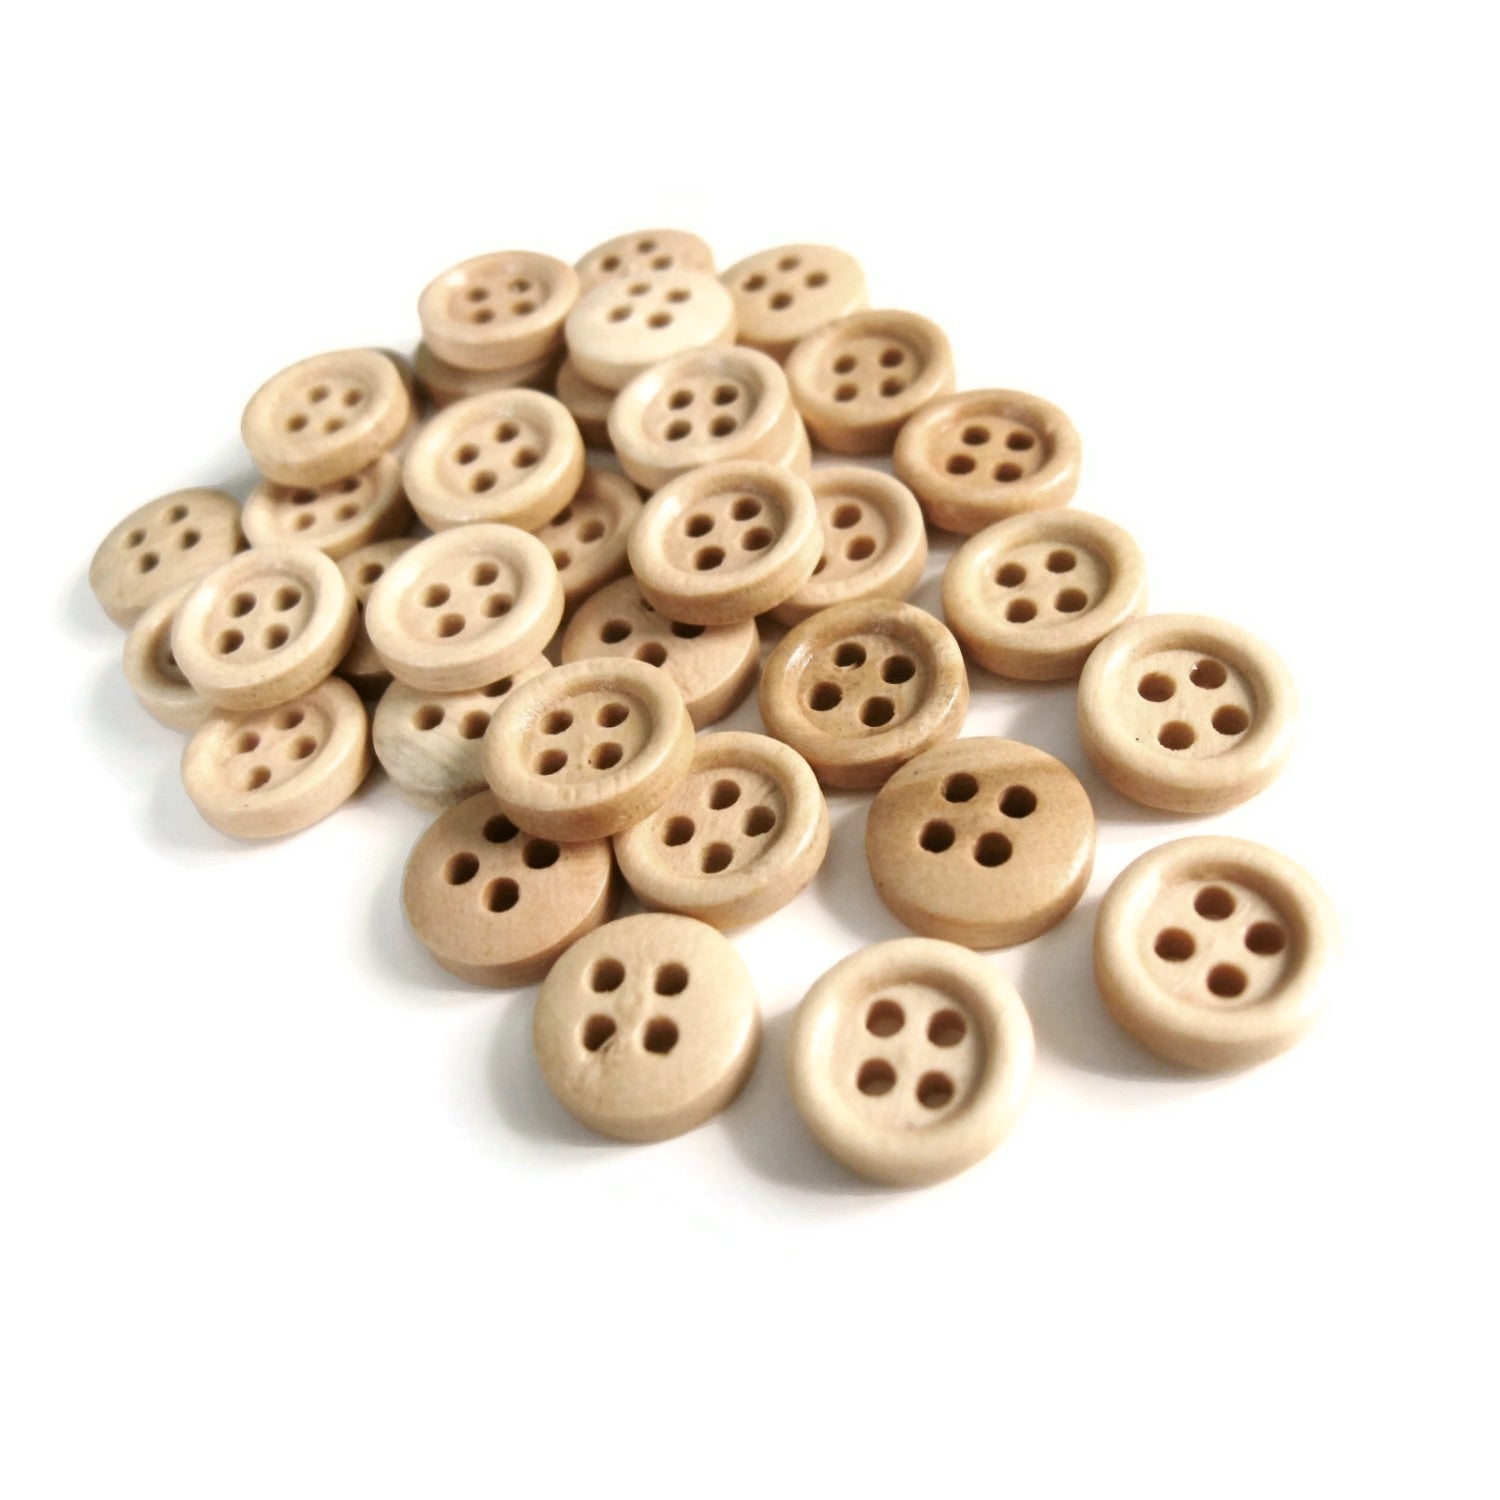 10mm tiny wooden buttons, 6 small natural buttons, Cute mini buttons for  dolls